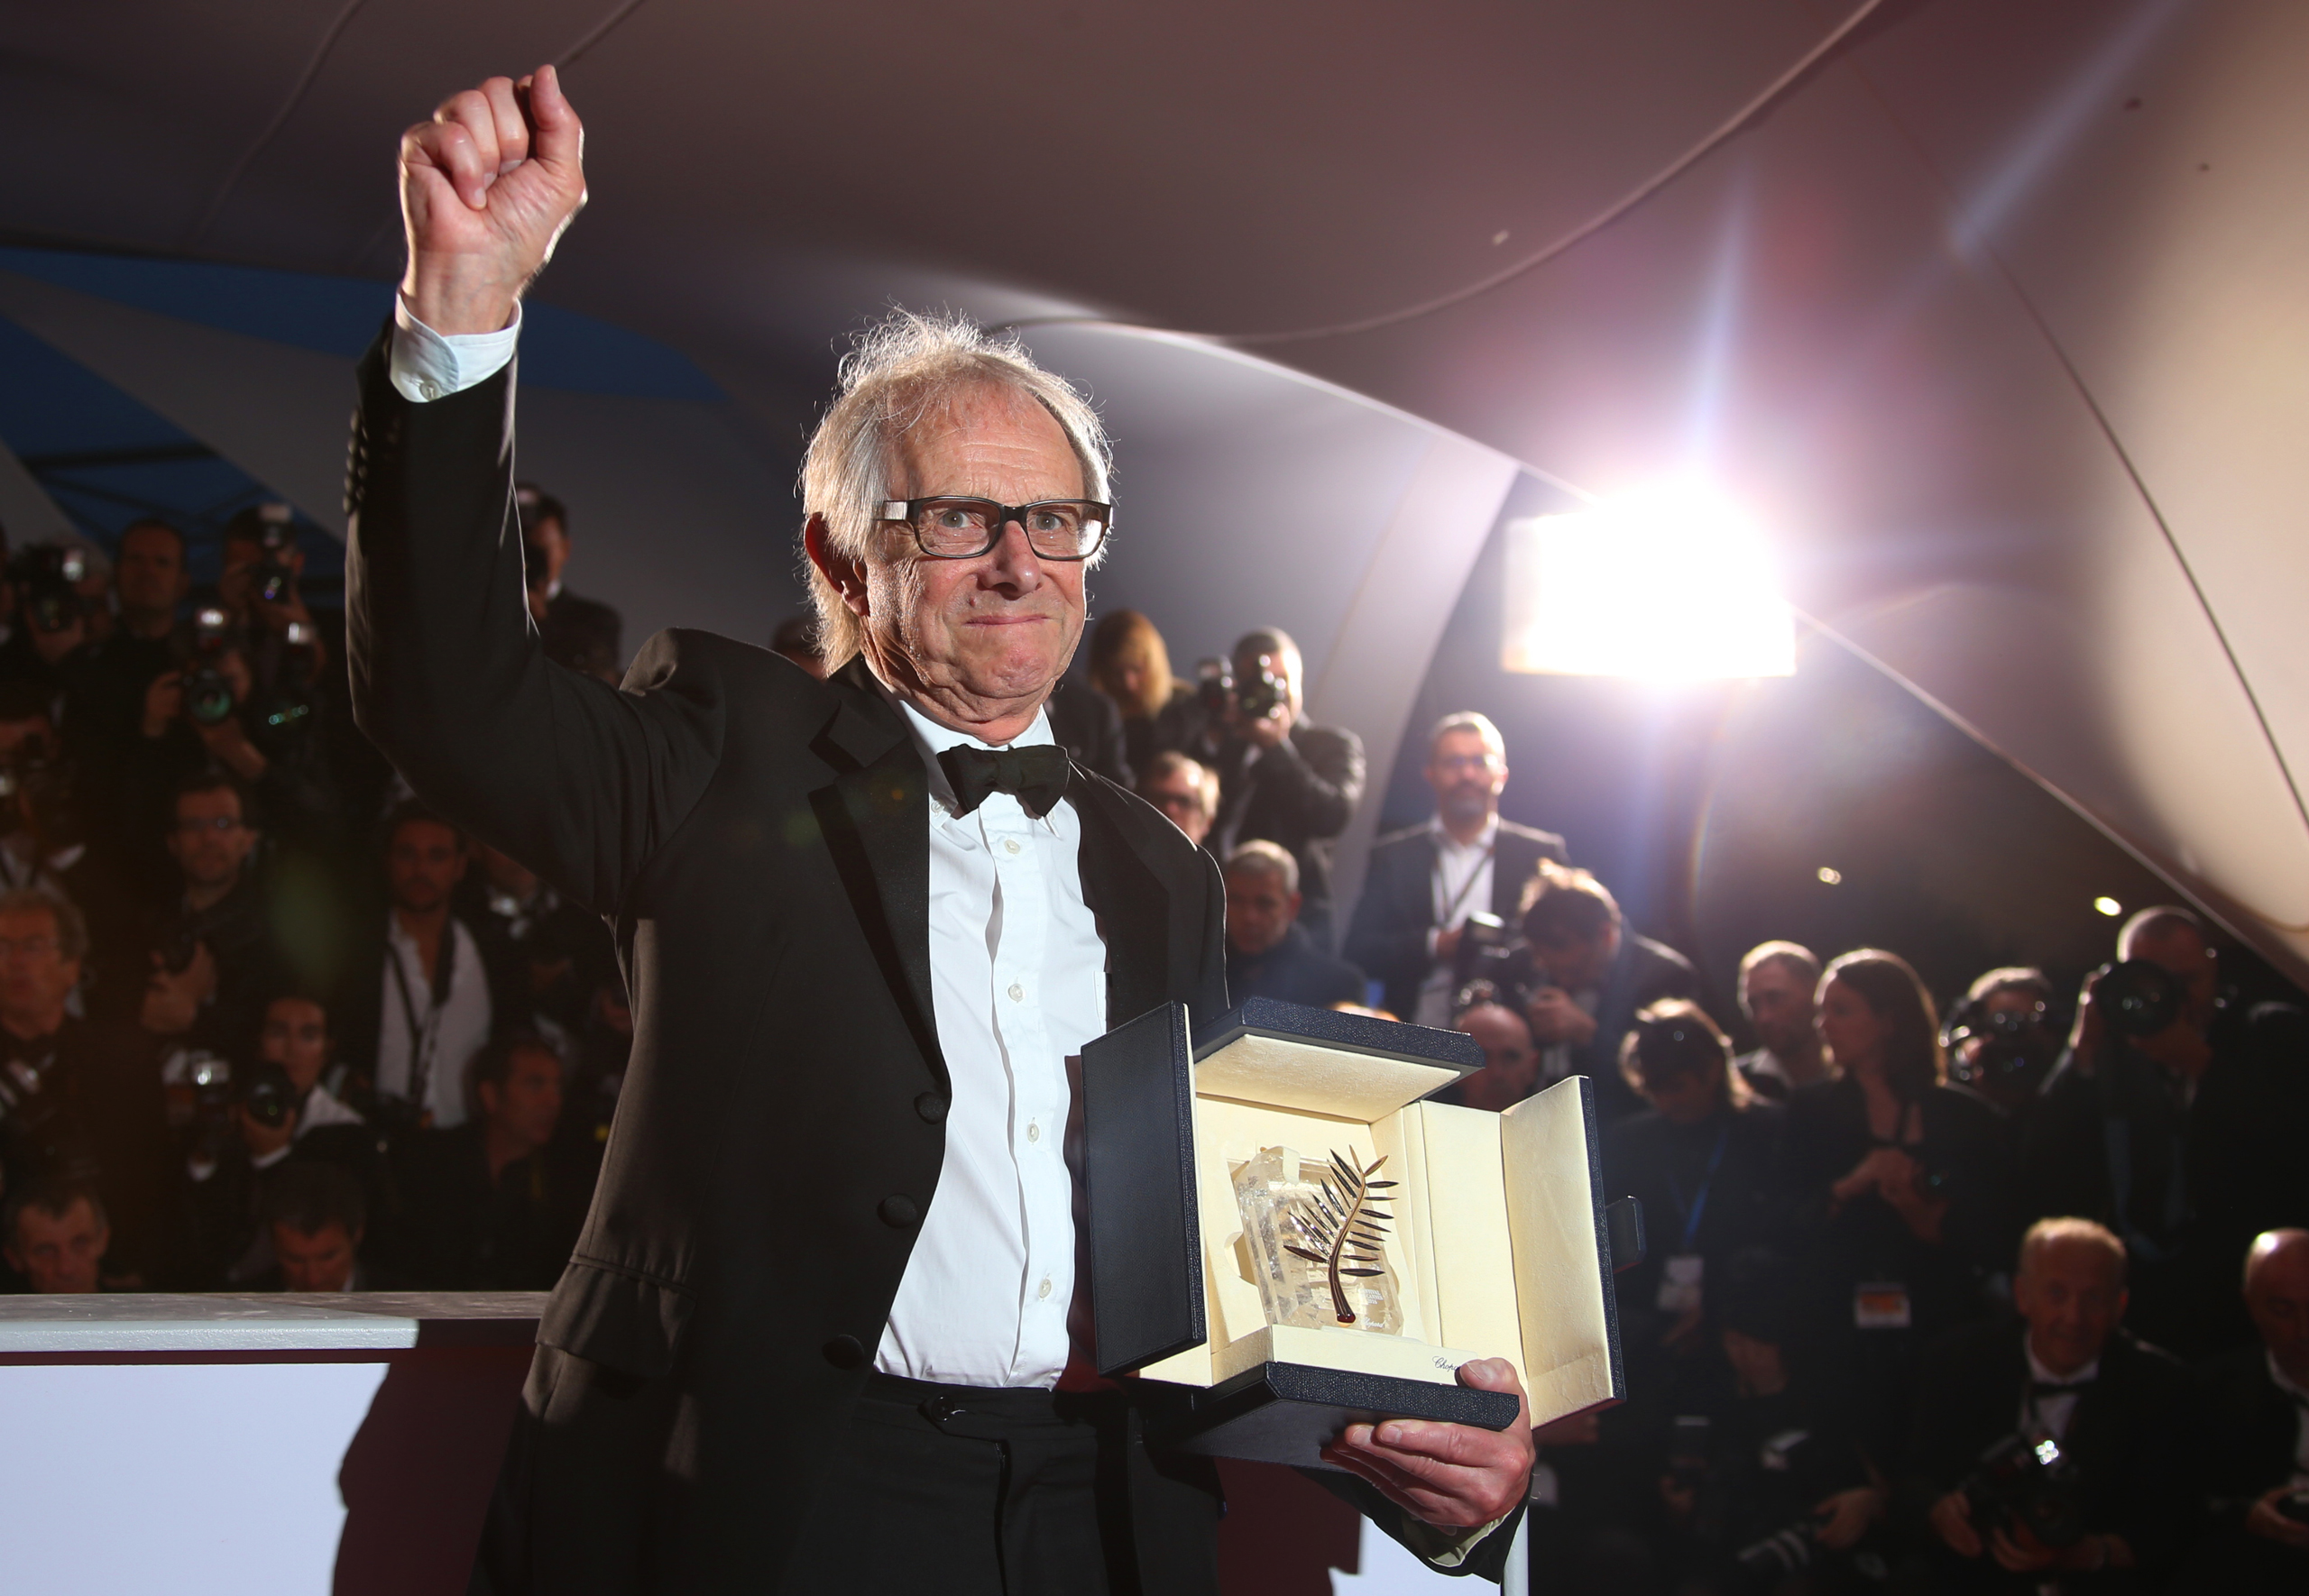 Director Ken Loach poses for photographers with the Palme d'Or for his film I, Daniel Blake during the photo call following the awards ceremony at the 69th international film festival, Cannes, France, on May 22, 2016. (Joel Ryan—AP)